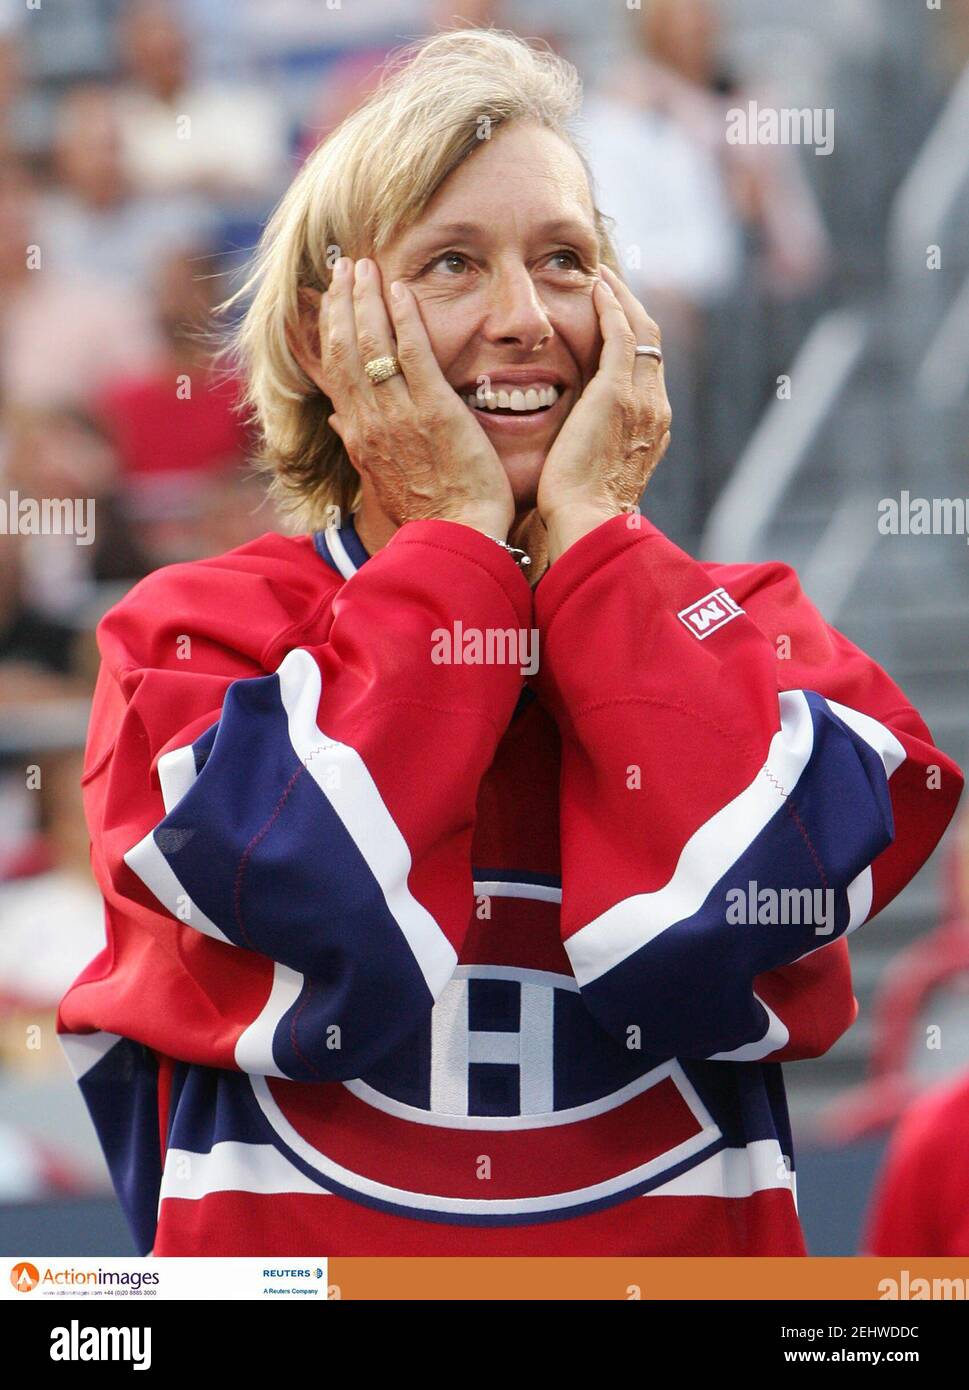 Tennis - Rogers Cup, Sony Ericsson WTA Tour - Montreal, Canada - 15/8/06  Tennis player Martina Navratilova, wearing a Montreal Canadiens hockey jersey, reacts as she is honoured during a ceremony at the Rogers Cup, Sony Ericsson WTA Tour in Montrea  Mandatory Credit: Action Images / Chris Wattie  Livepic Stock Photo